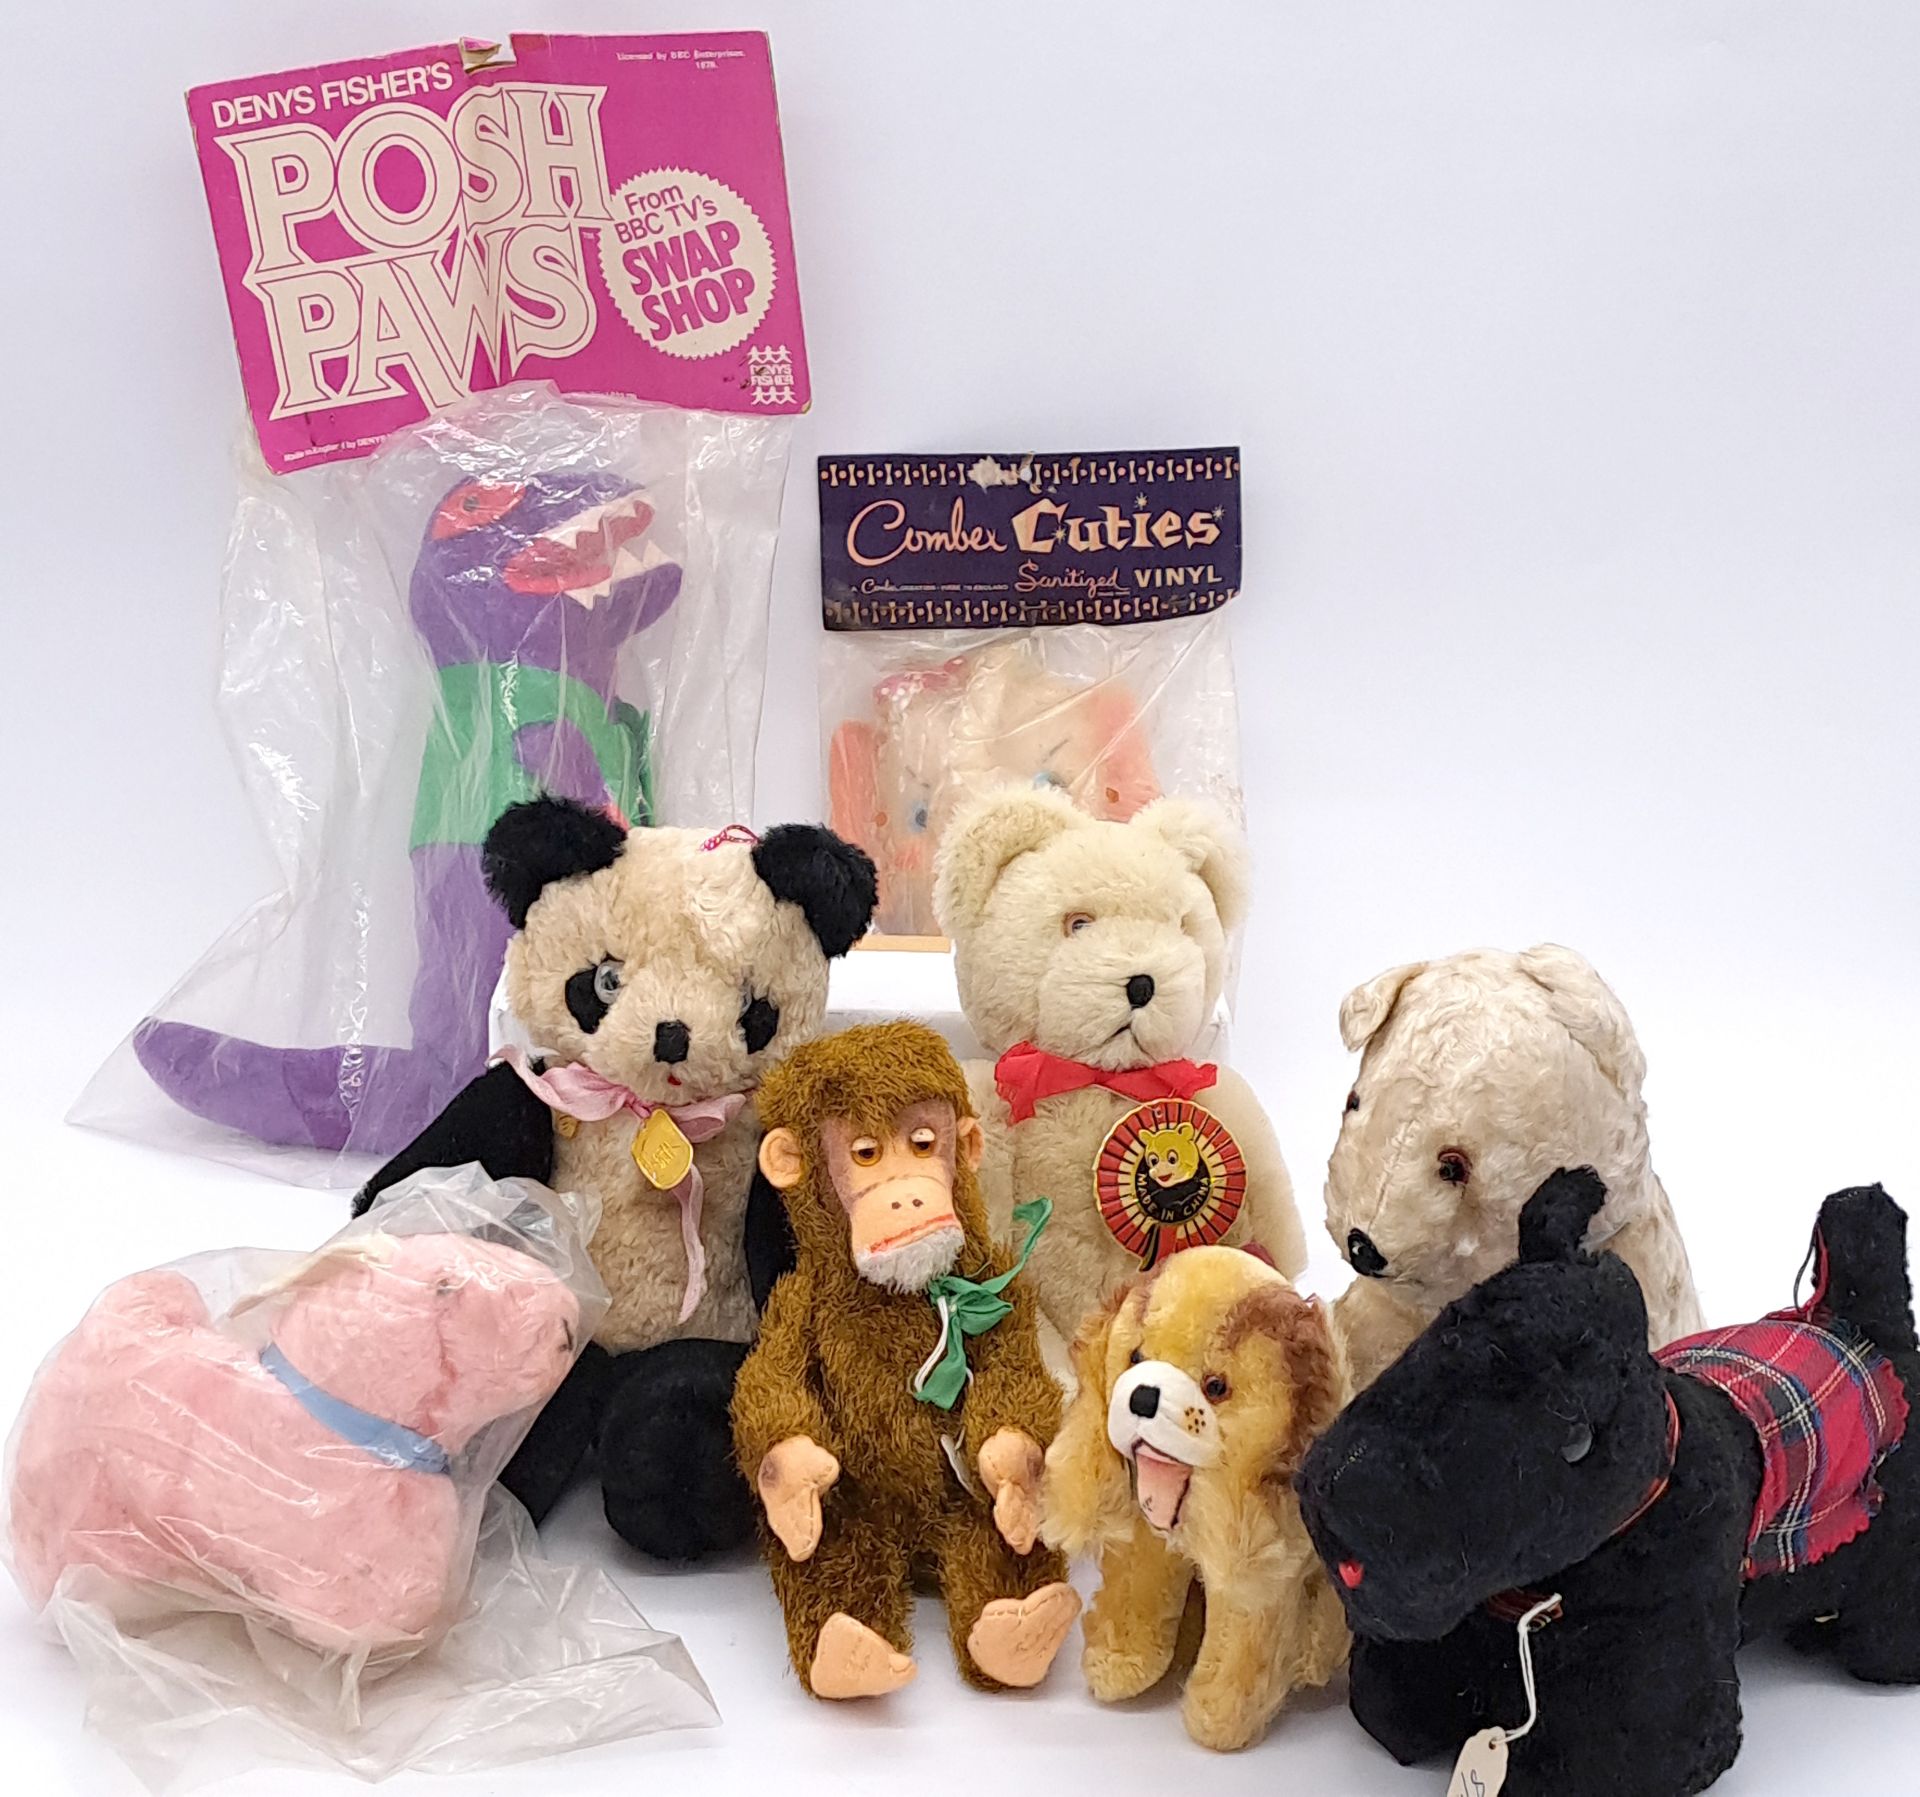 Assortment of vintage bears and animals, including Shanghai Toys